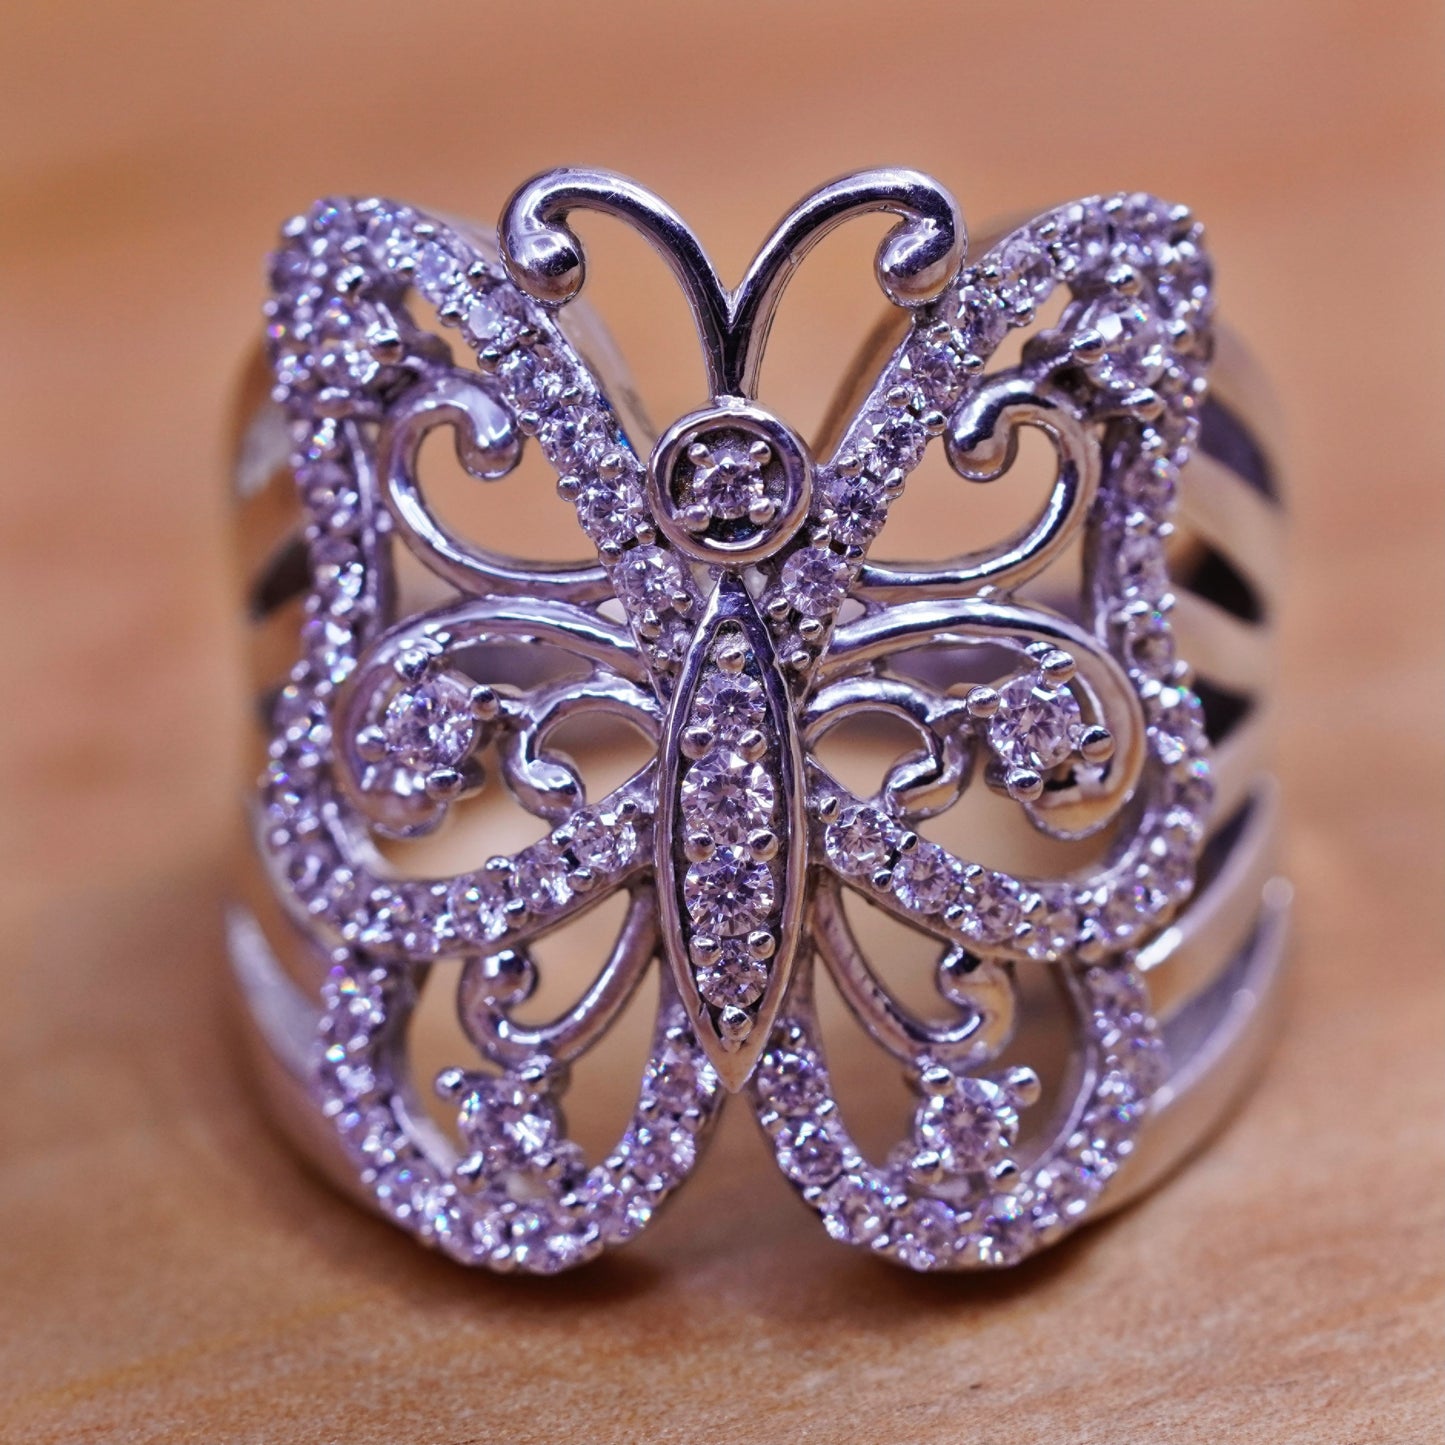 Size 10, vintage SJD Sterling silver ring, 925 butterfly with cluster Cz